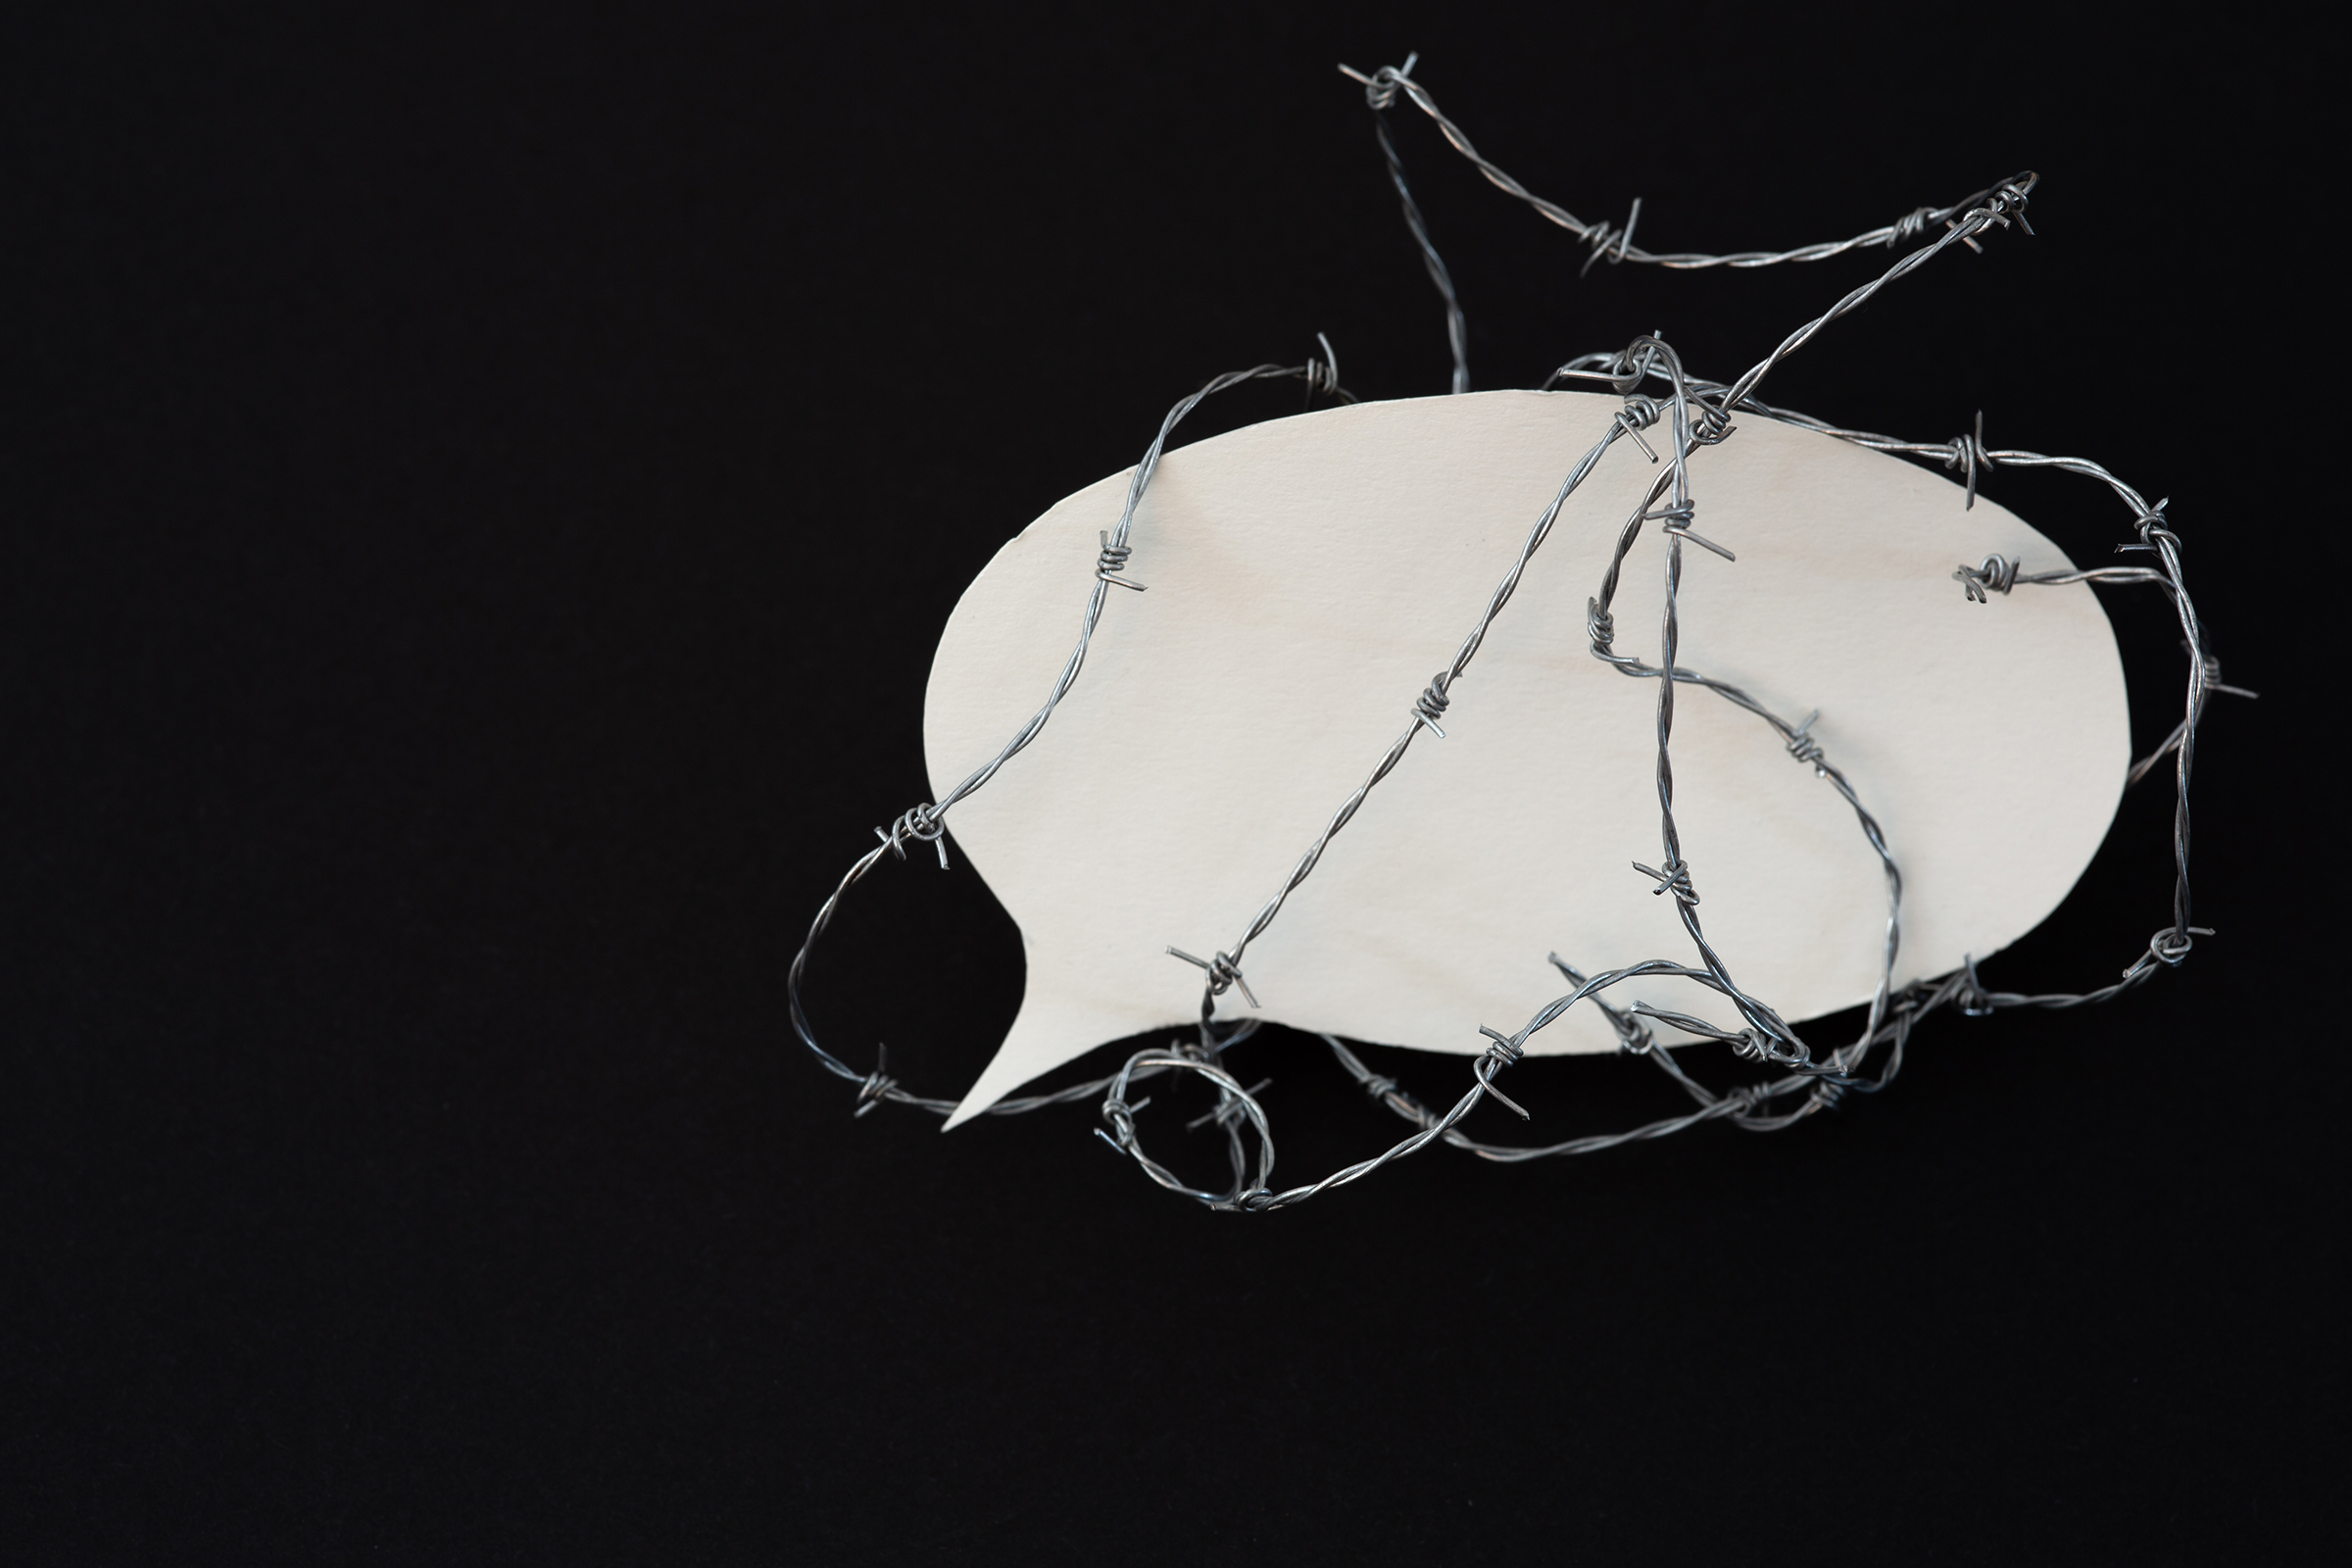 Protect the freedom of speech - barbed wire around a speech bubble